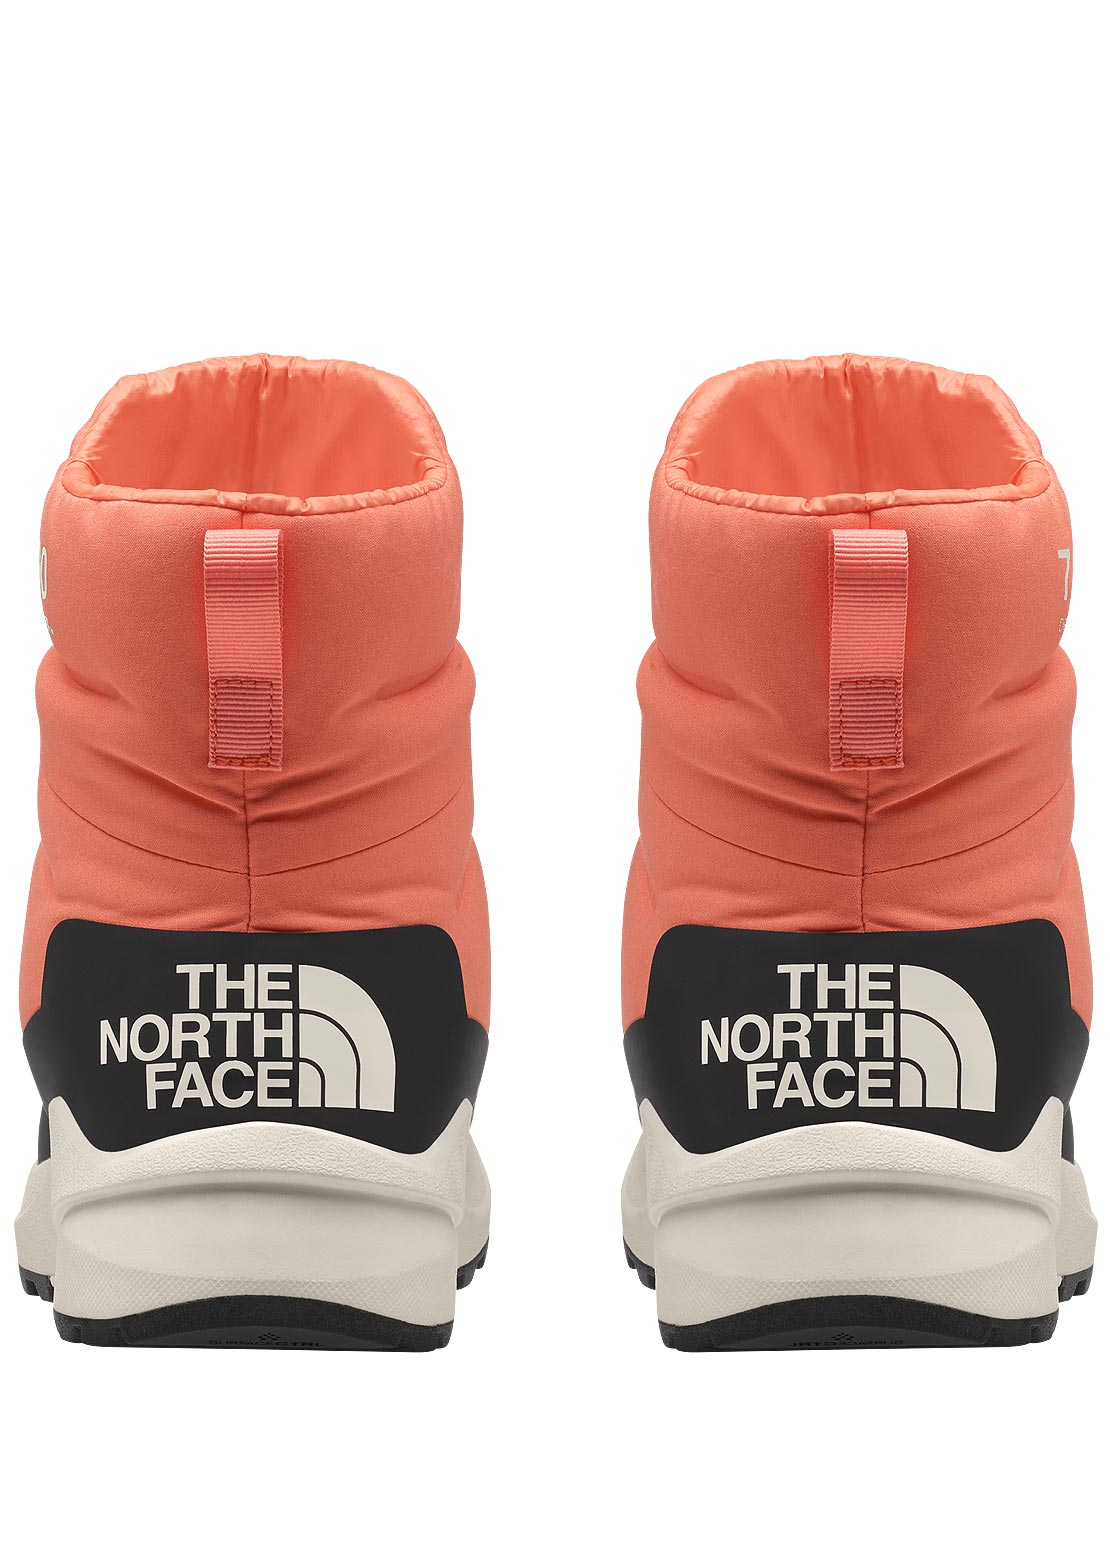 The North Face Women's Nuptse II Bootie WP - PRFO Sports